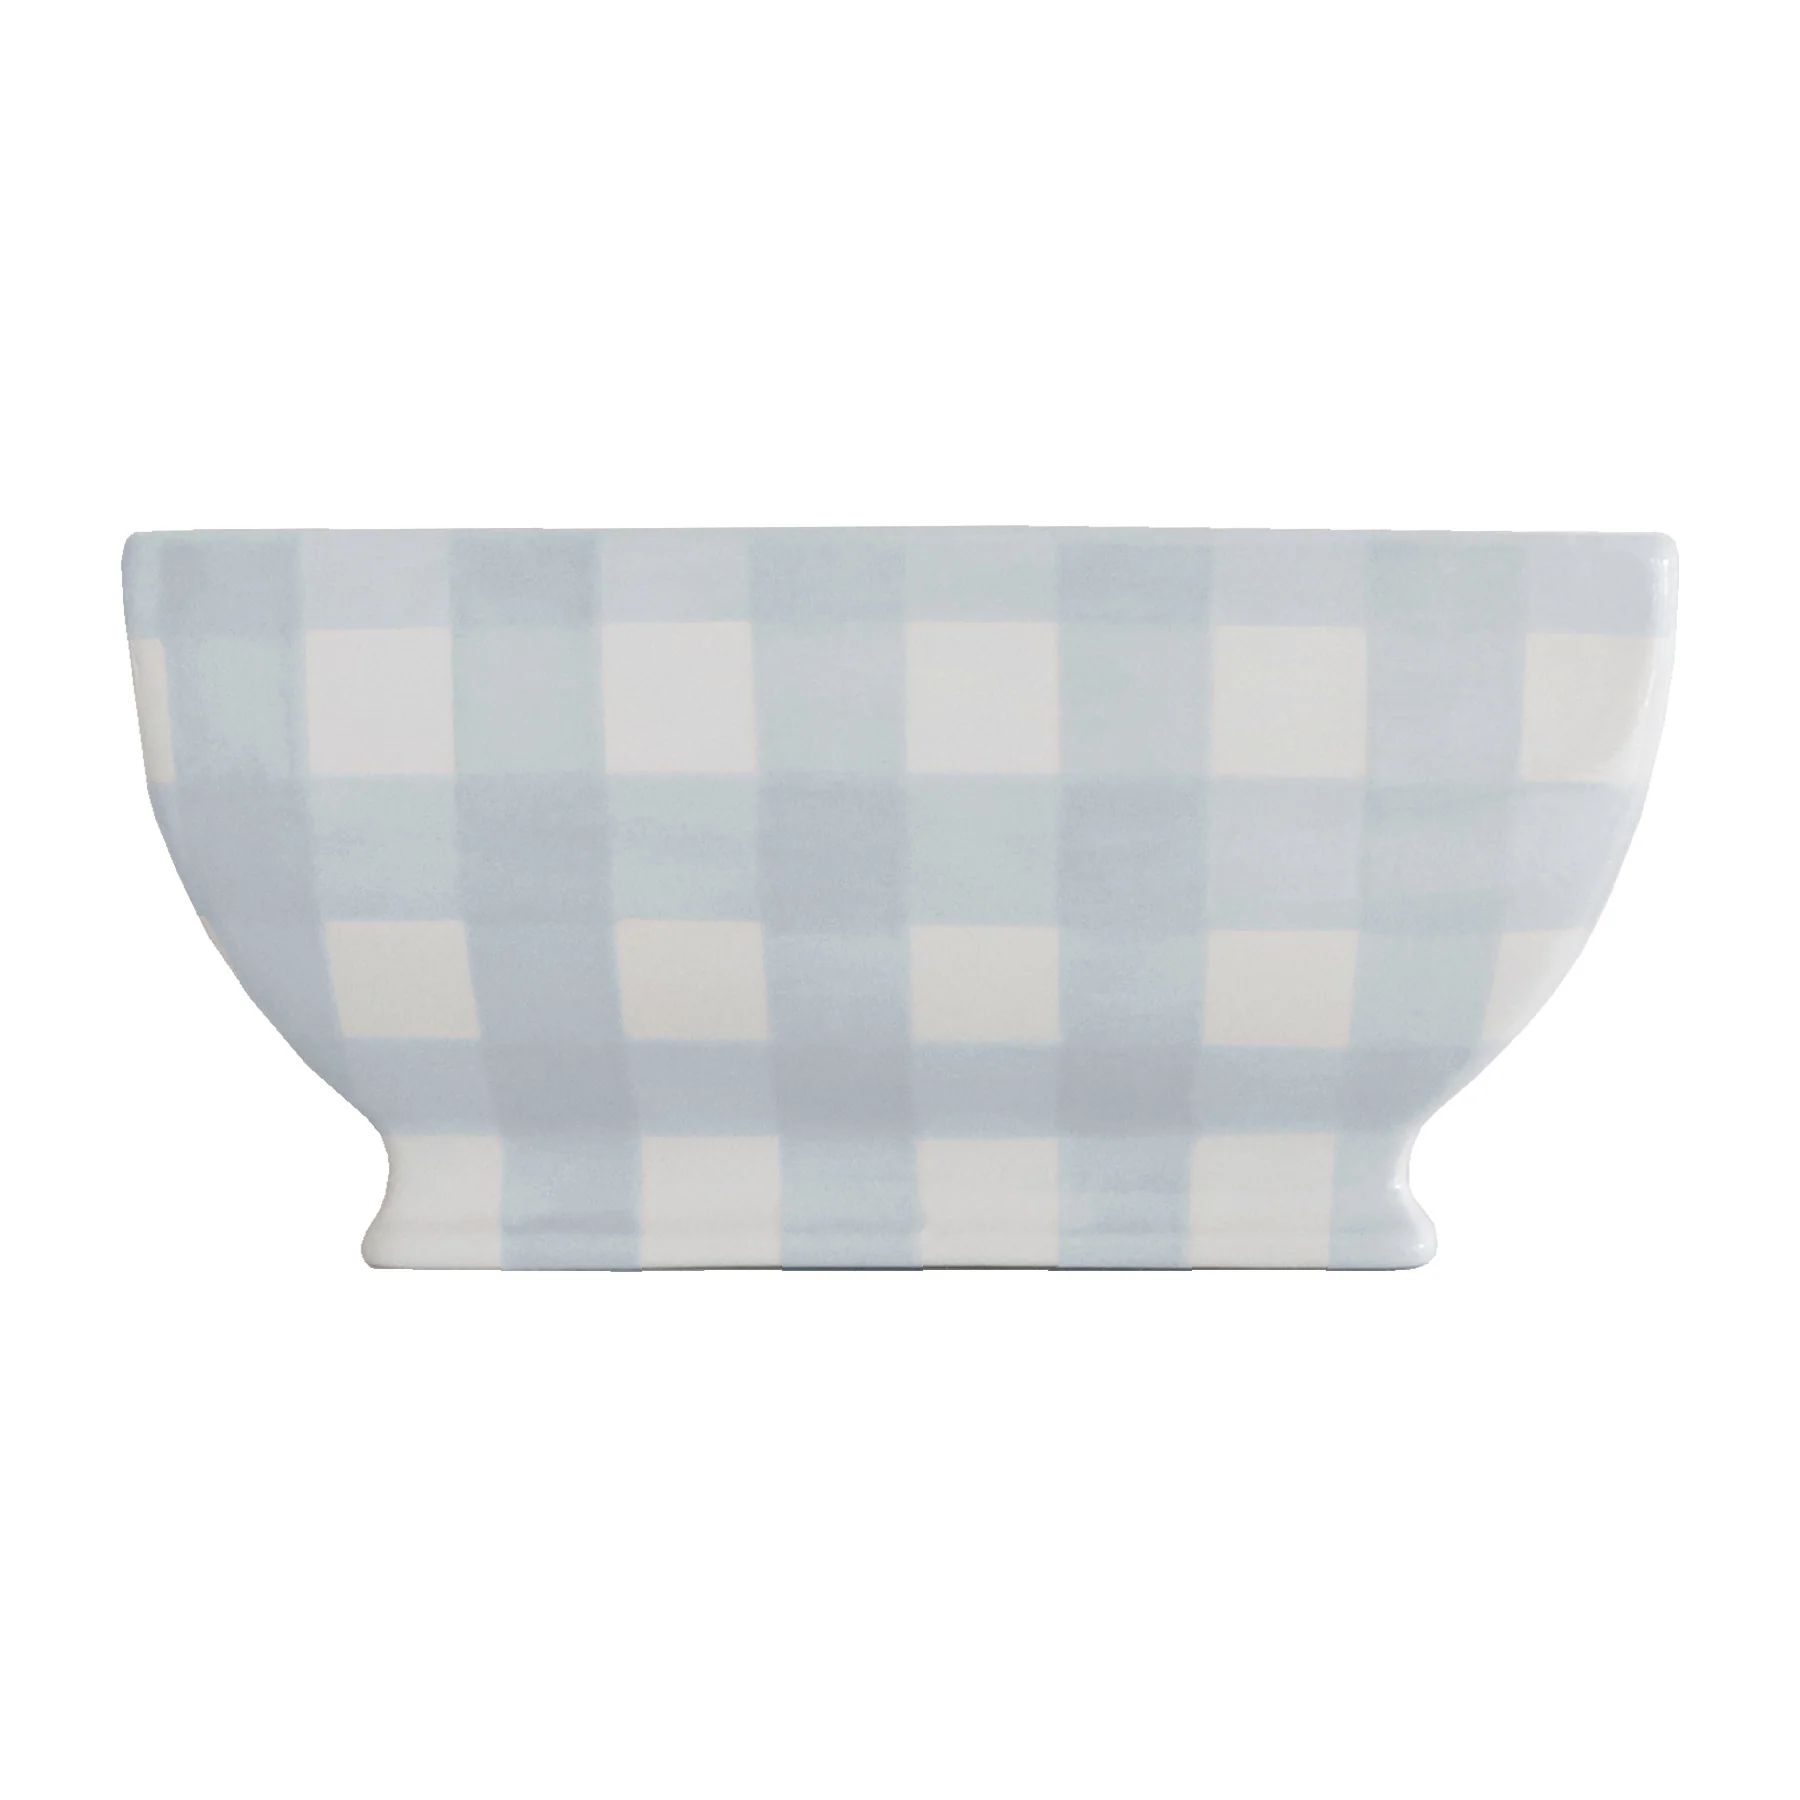 Gingham Planter | Lo Home by Lauren Haskell Designs